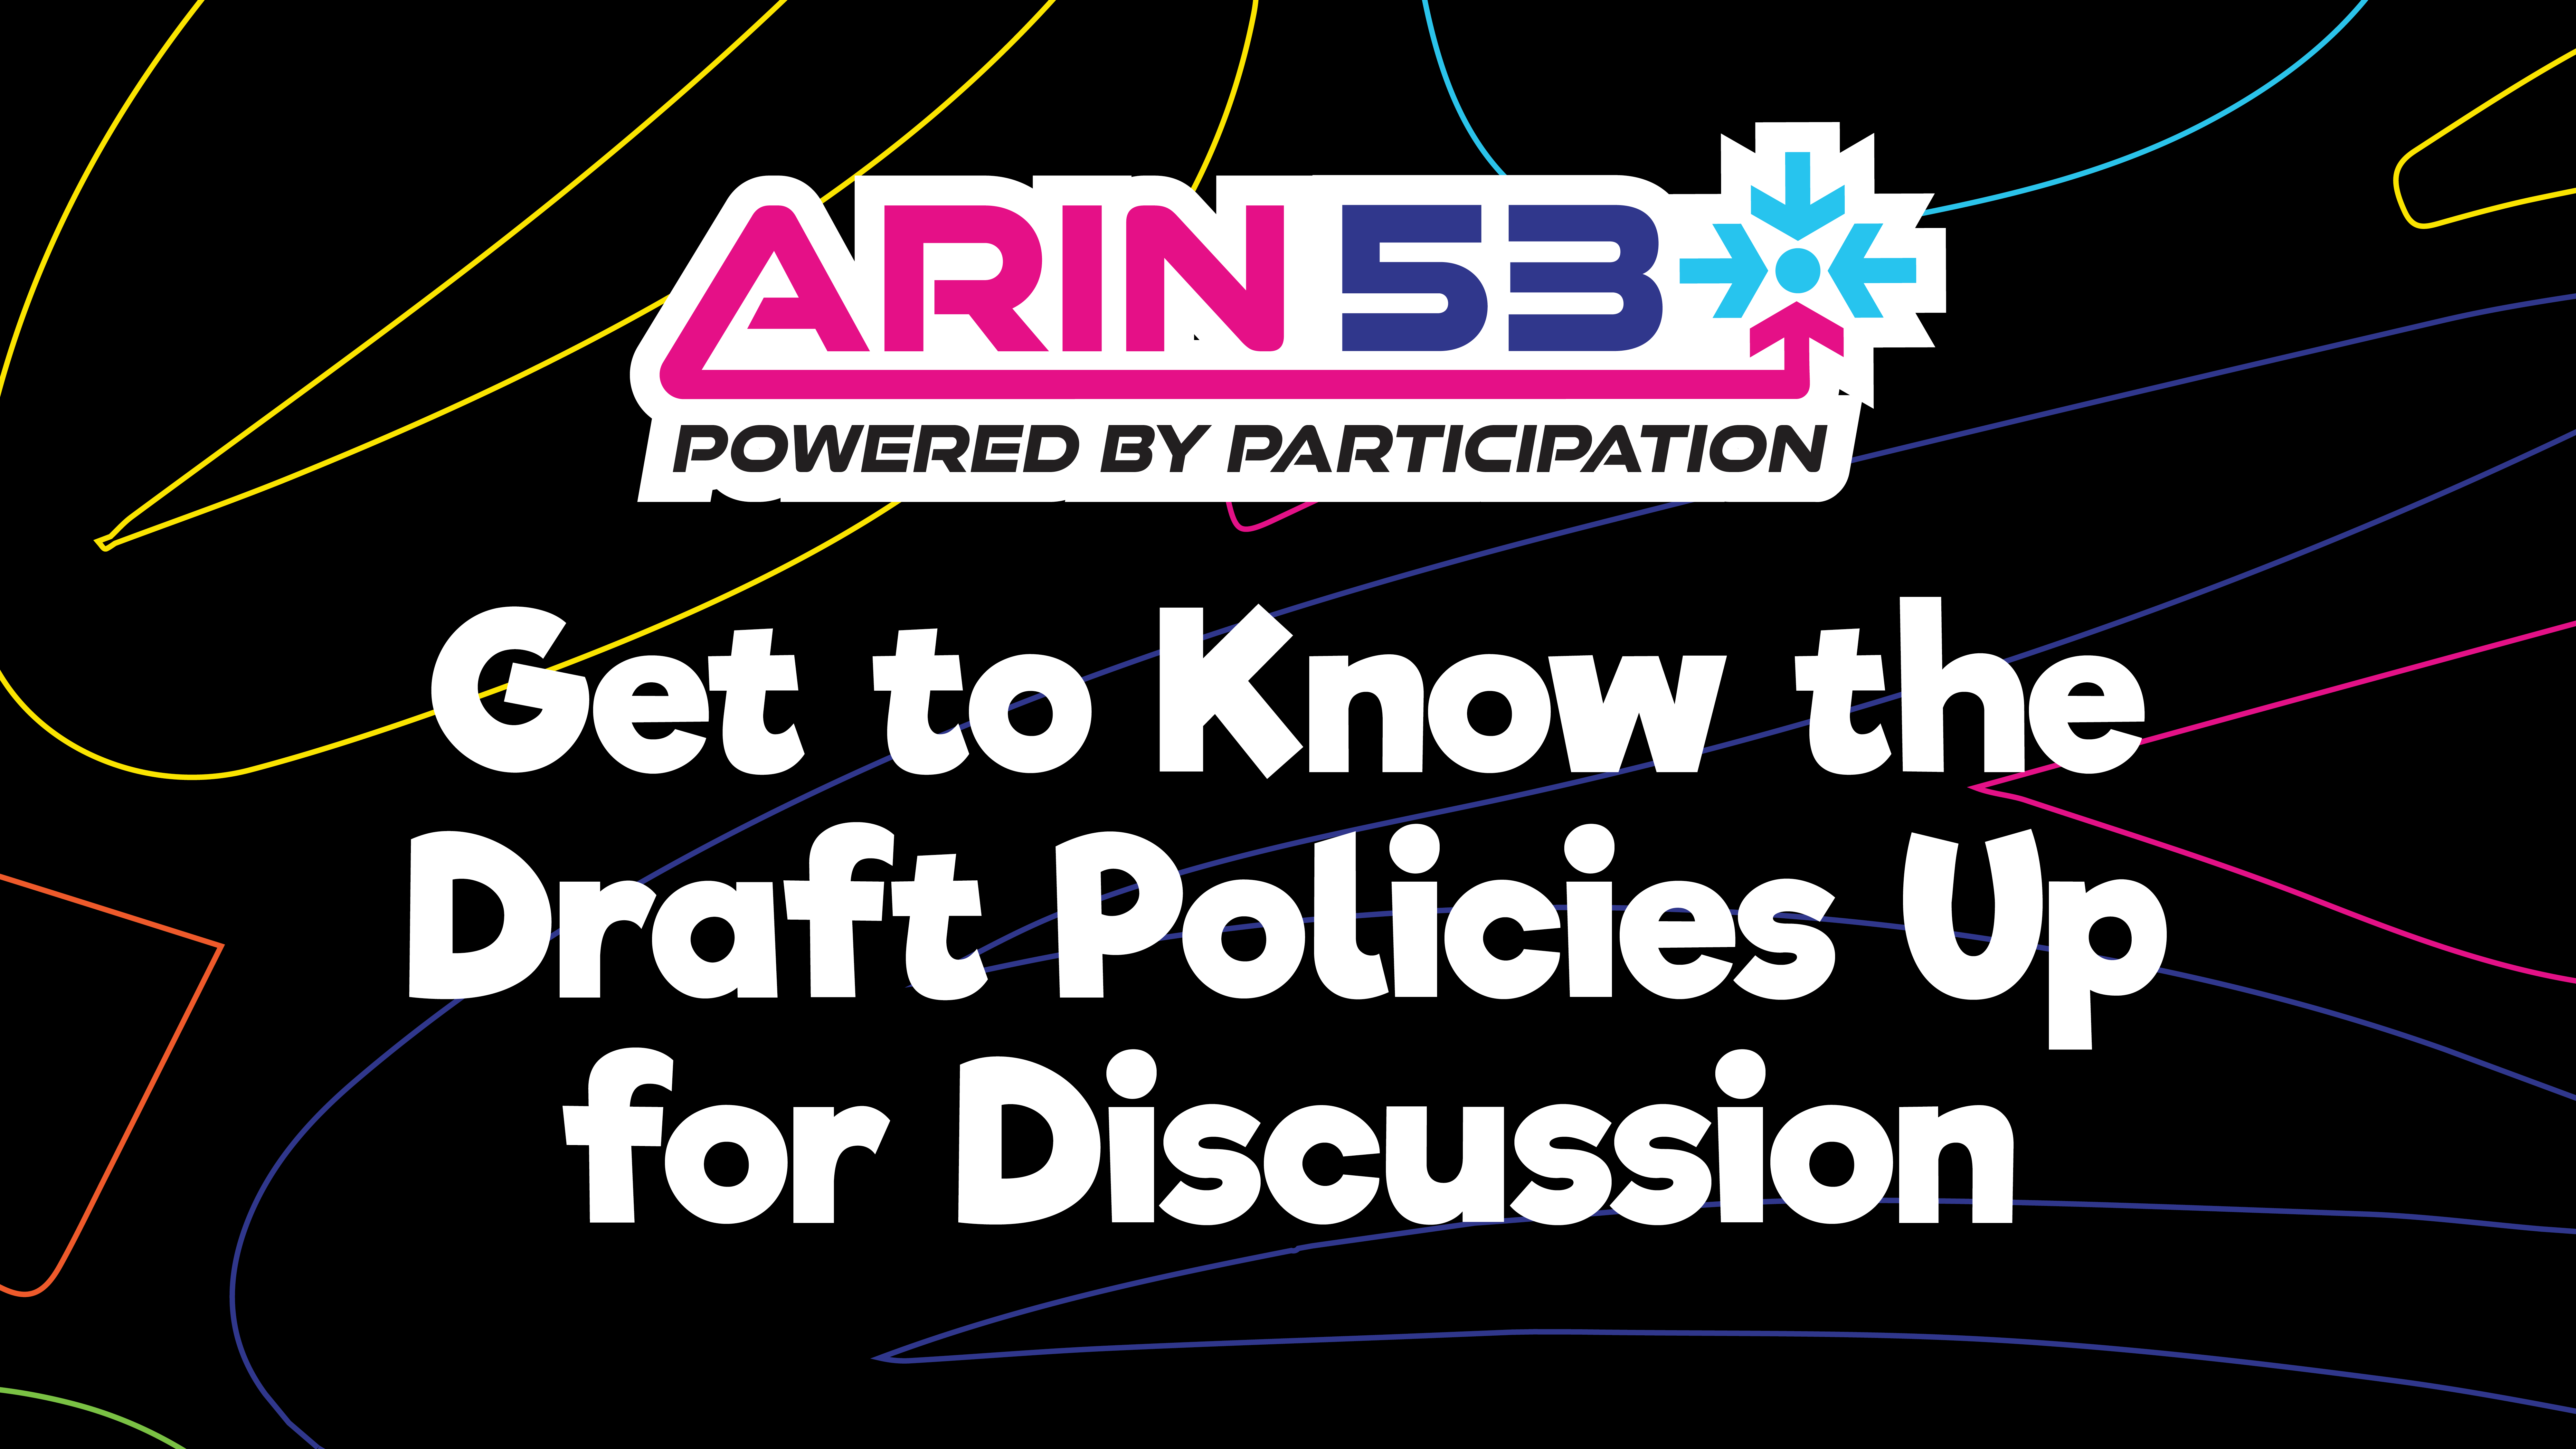 Get to Know the Draft Policies Up for Discussion at ARIN 53